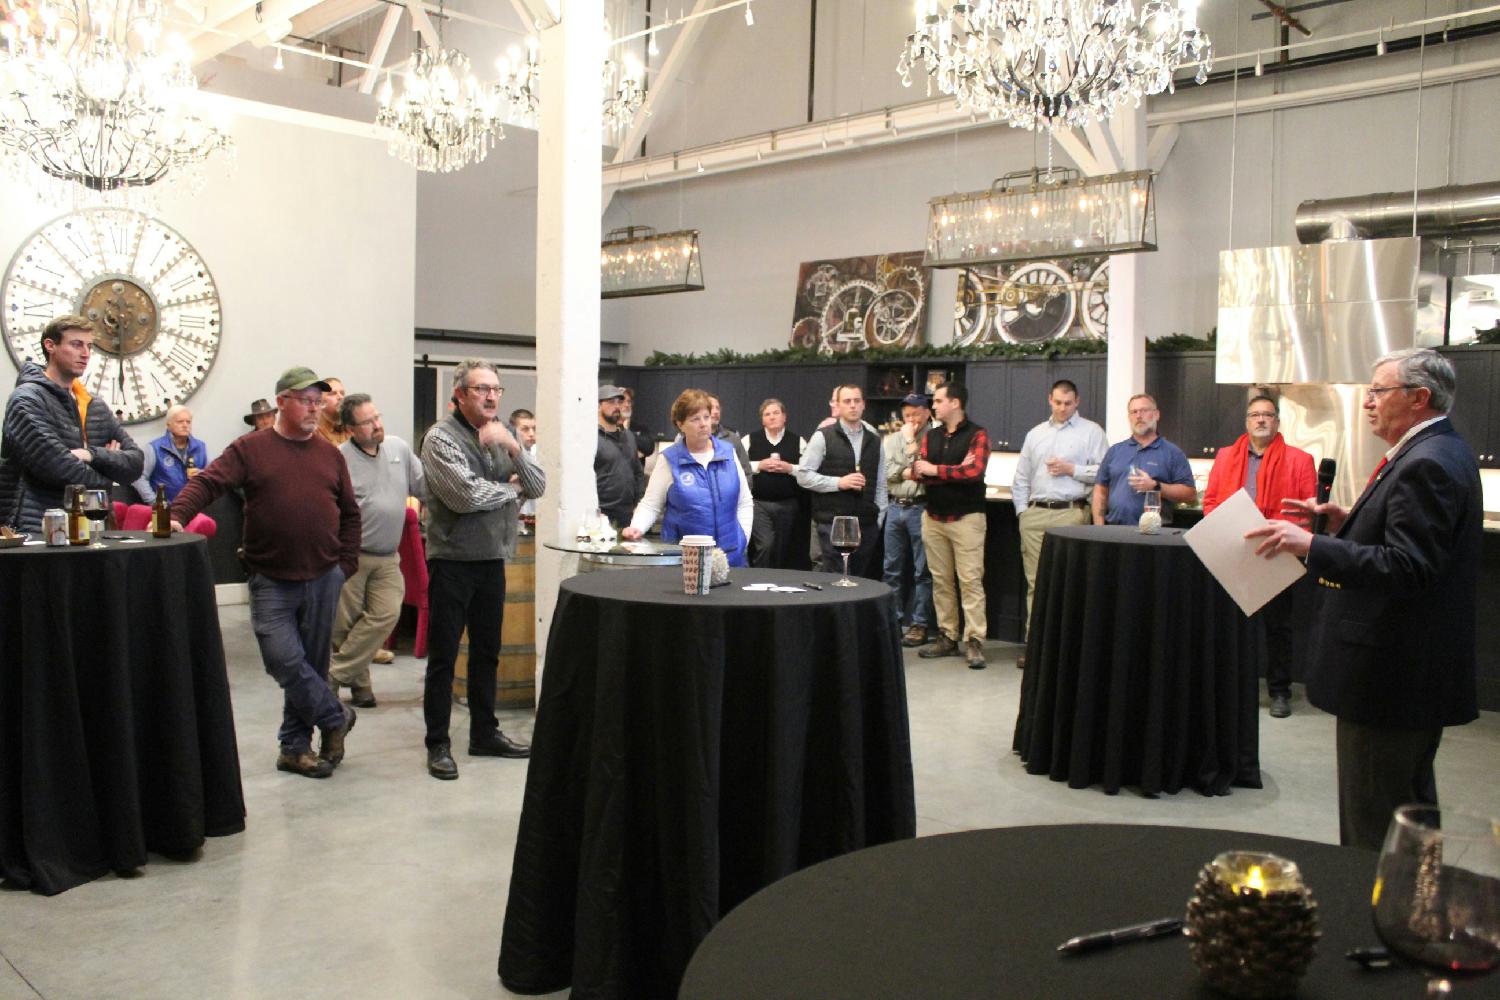 Company event at Cellardoor Winery, a project the company completed two years prior.